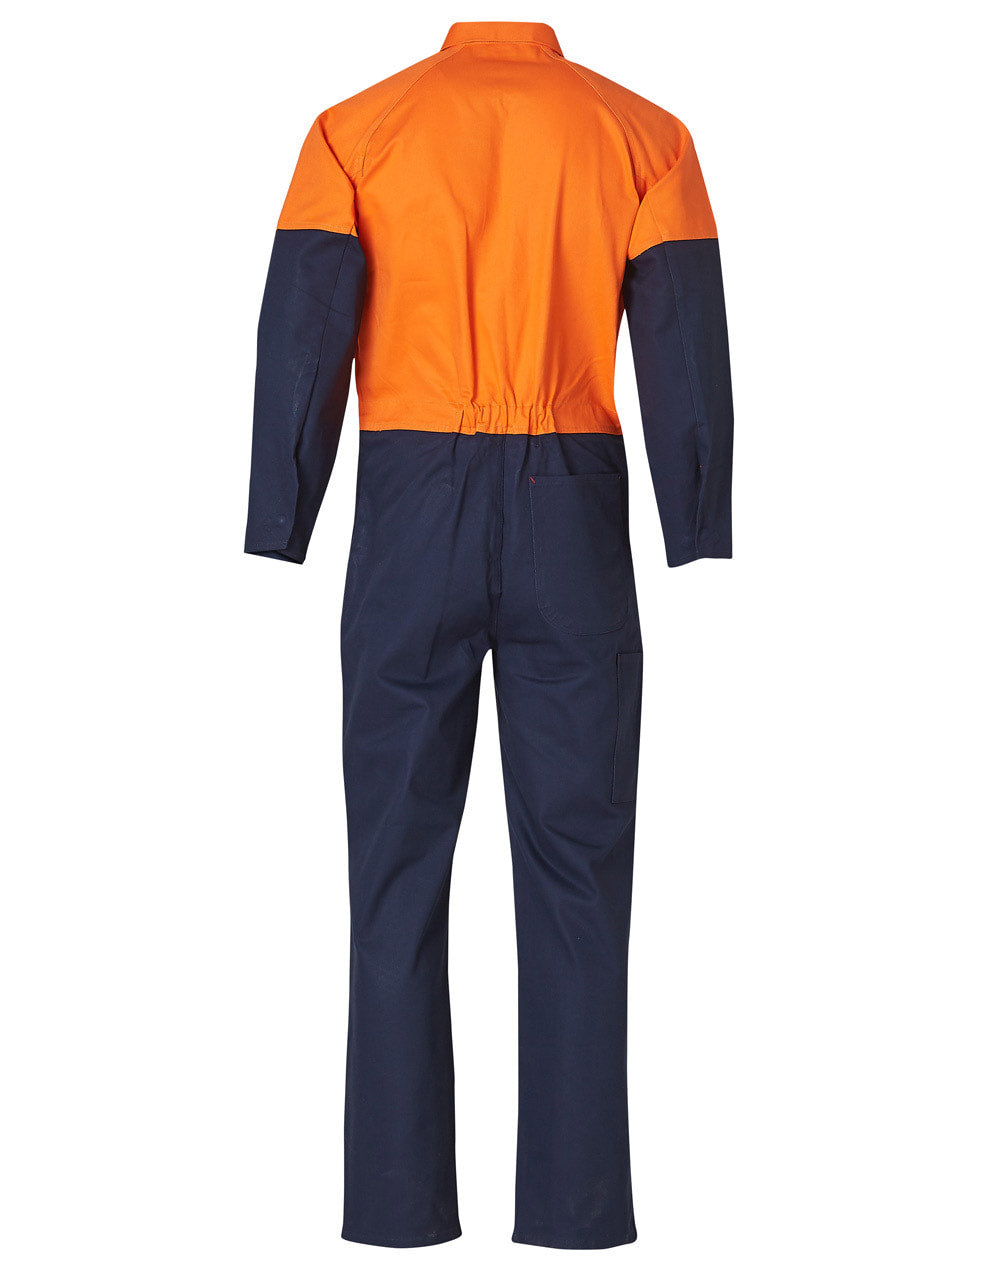 AIW SW205 MEN'S TWO TONE COVERALL Stout Size